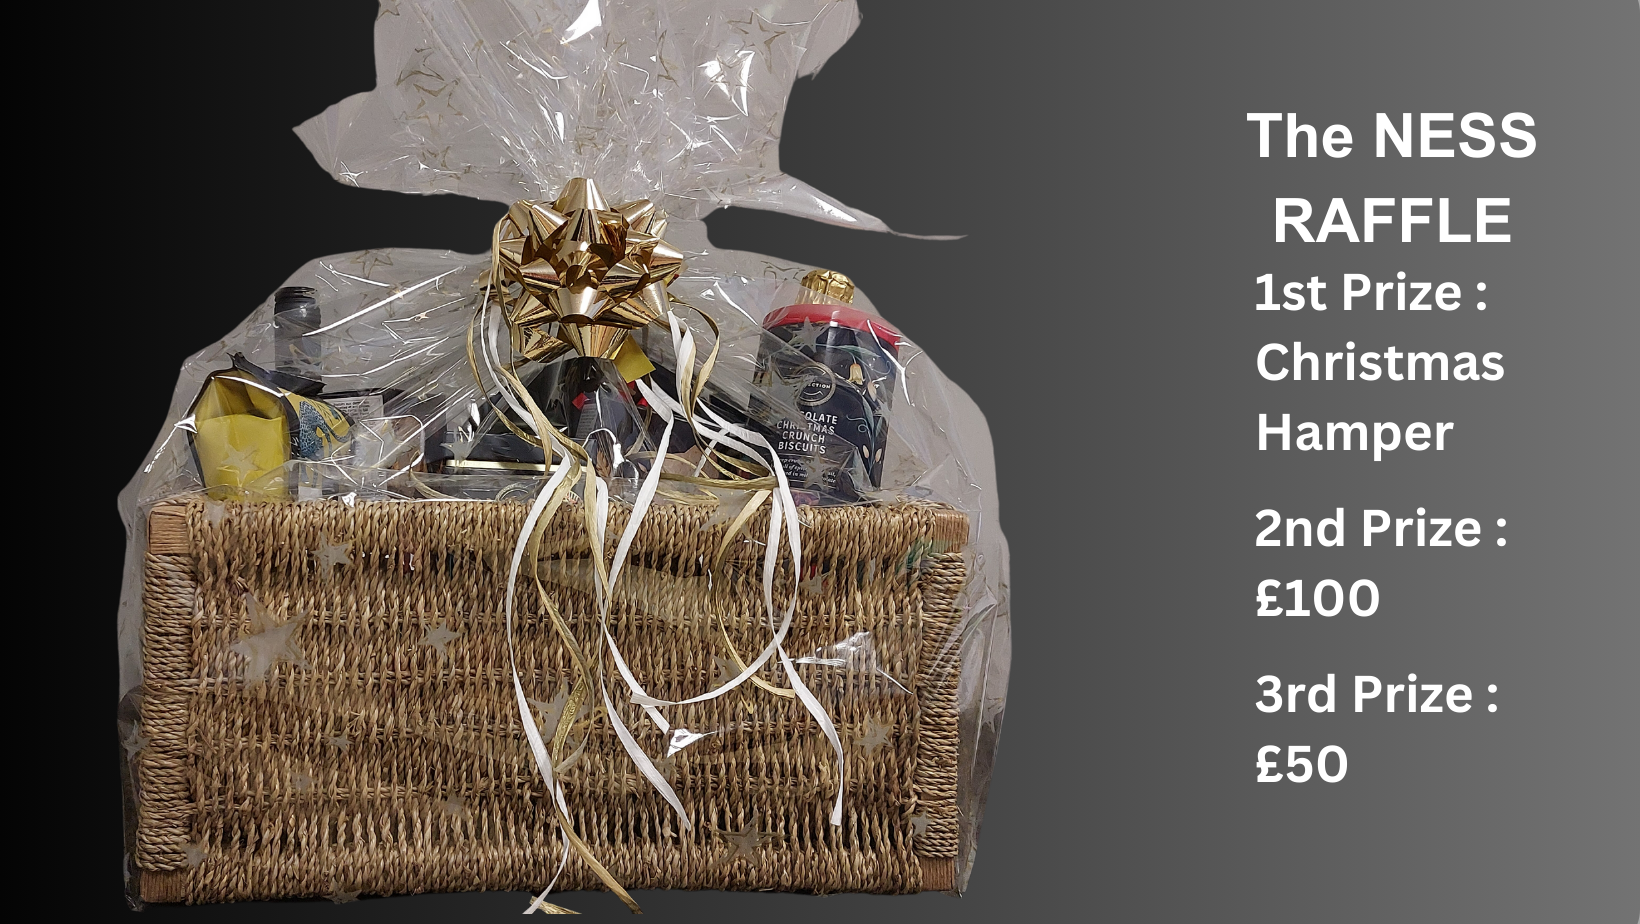 photo of festive food hamper. text reads - The NESS Hamper.